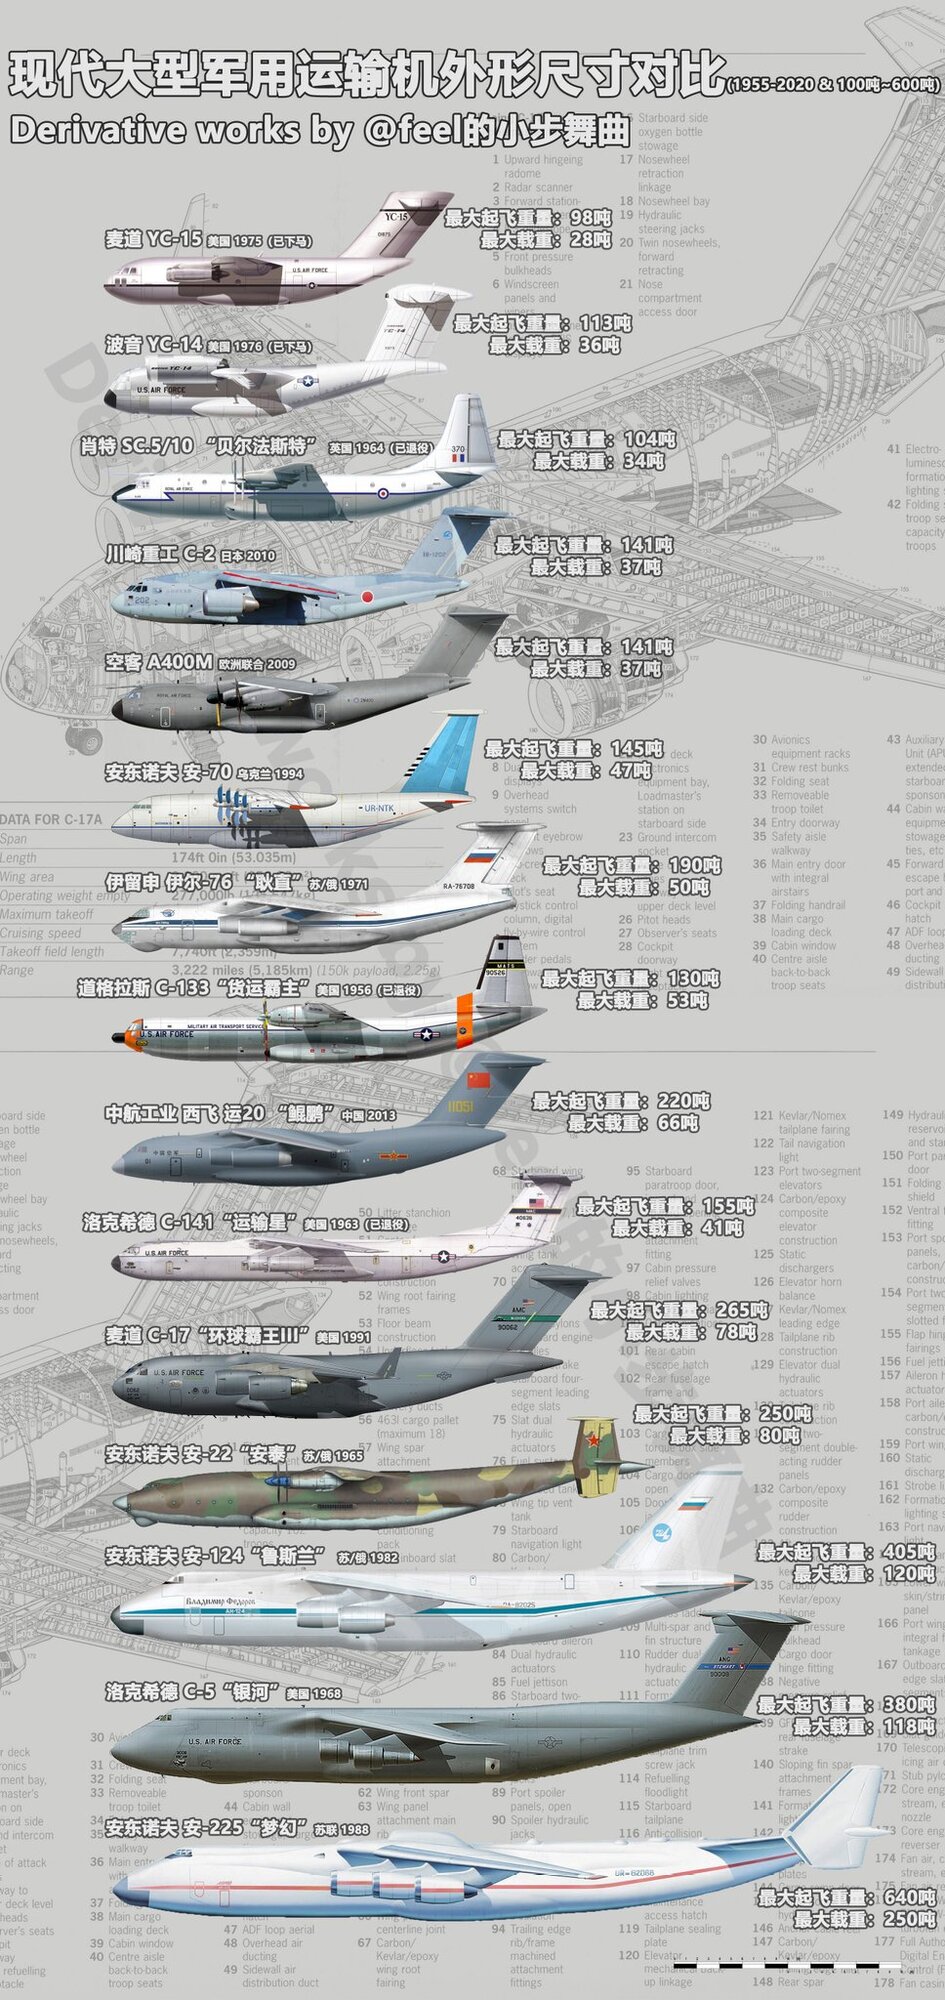 Visual Comparison of shape and size of Large Transport Aircraft 02.jpeg